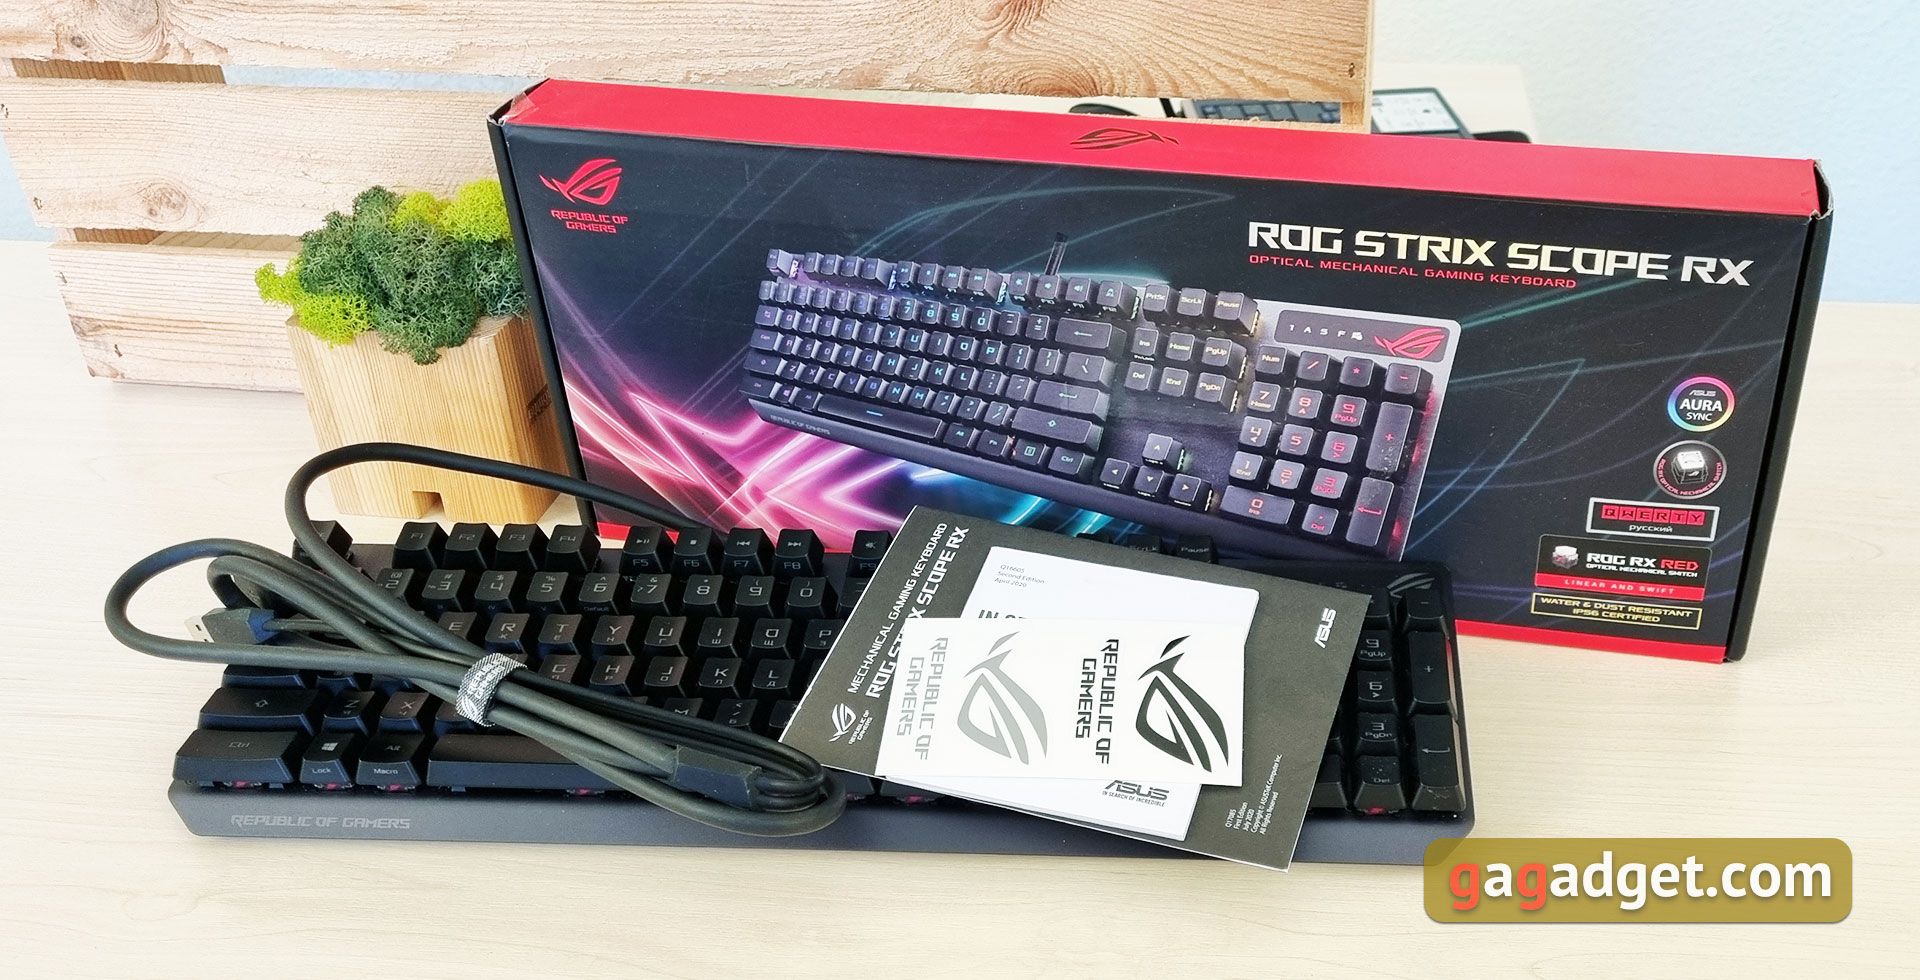 ASUS ROG Strix Scope RX Review: an Opto-Mechanical Gaming Keyboard with Water Protection-2